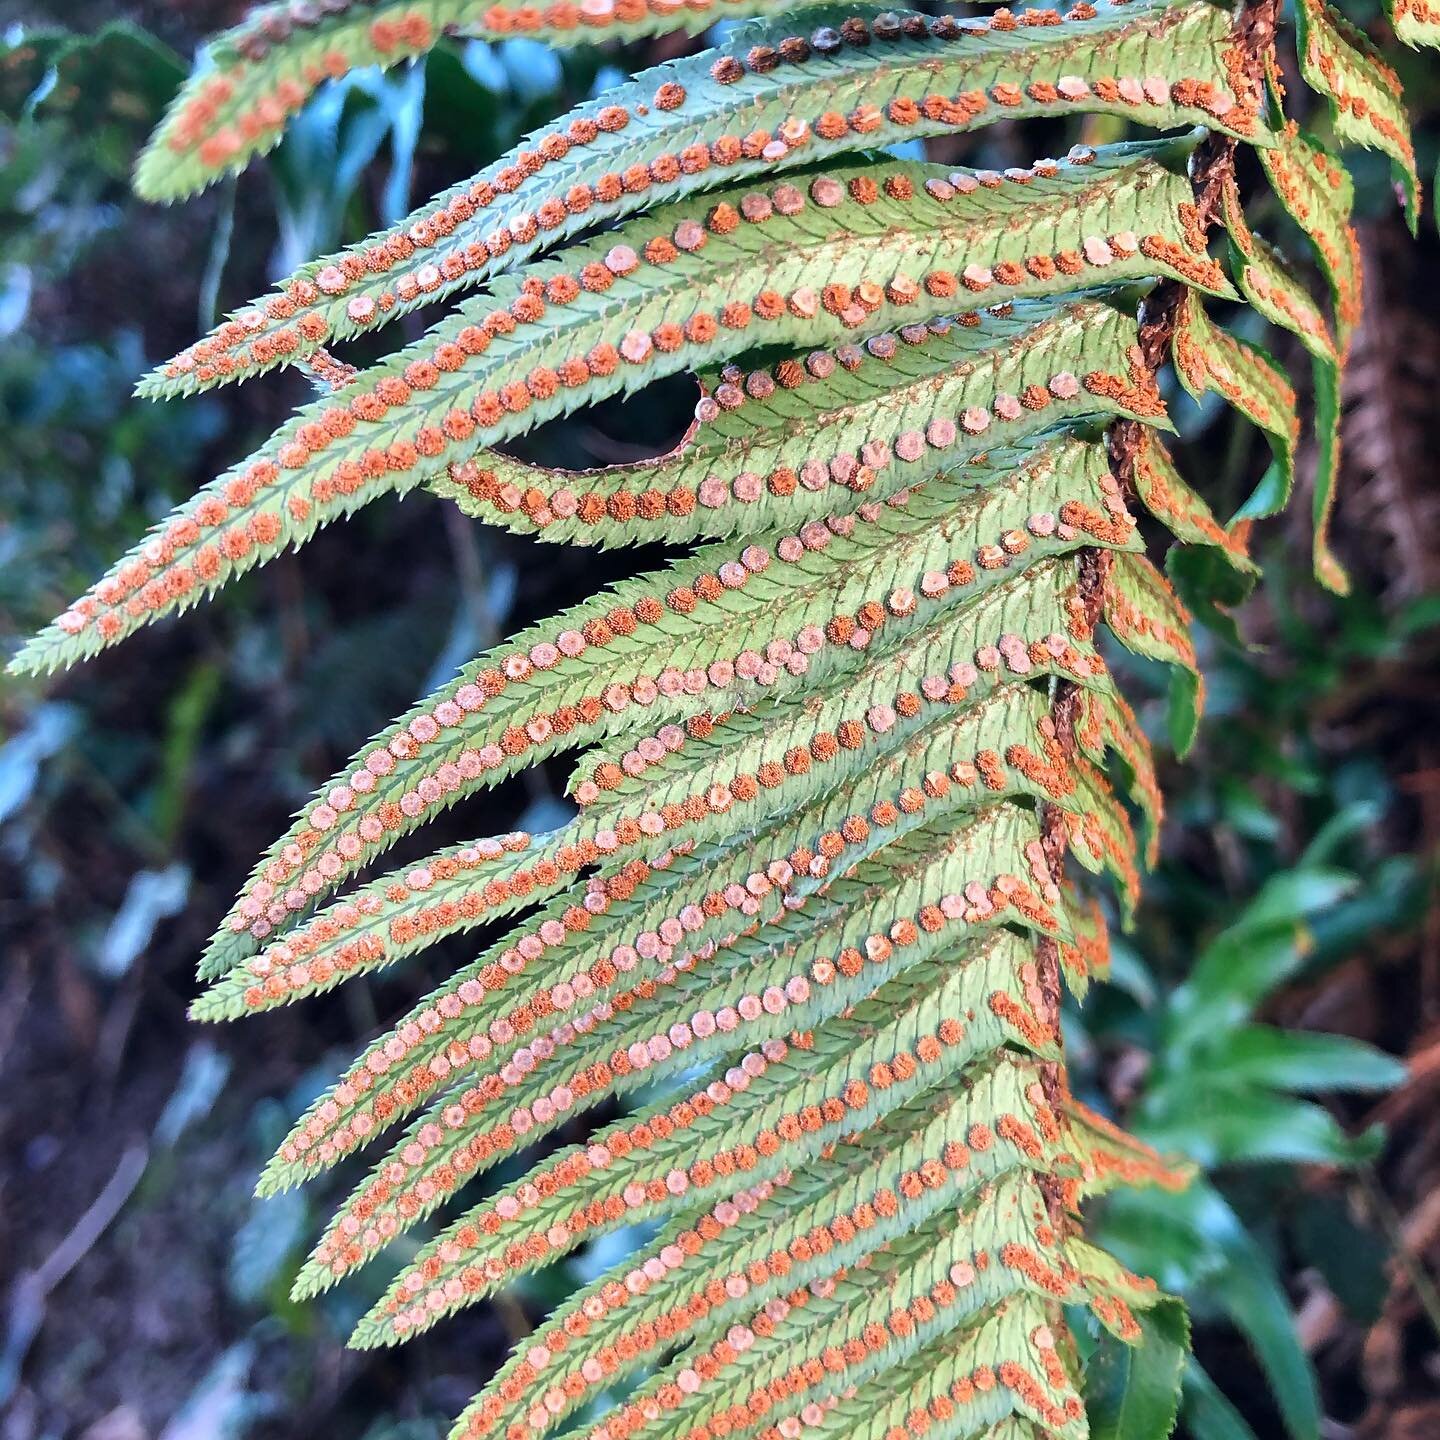 Shield Ferns (Dryopteris sp.)

Ferns have an interesting reproductive process that, given palientological evidence, has not changed much over tens of millions of years - an example of evolutionary stasis. Ferns have two free-living generations. A spo